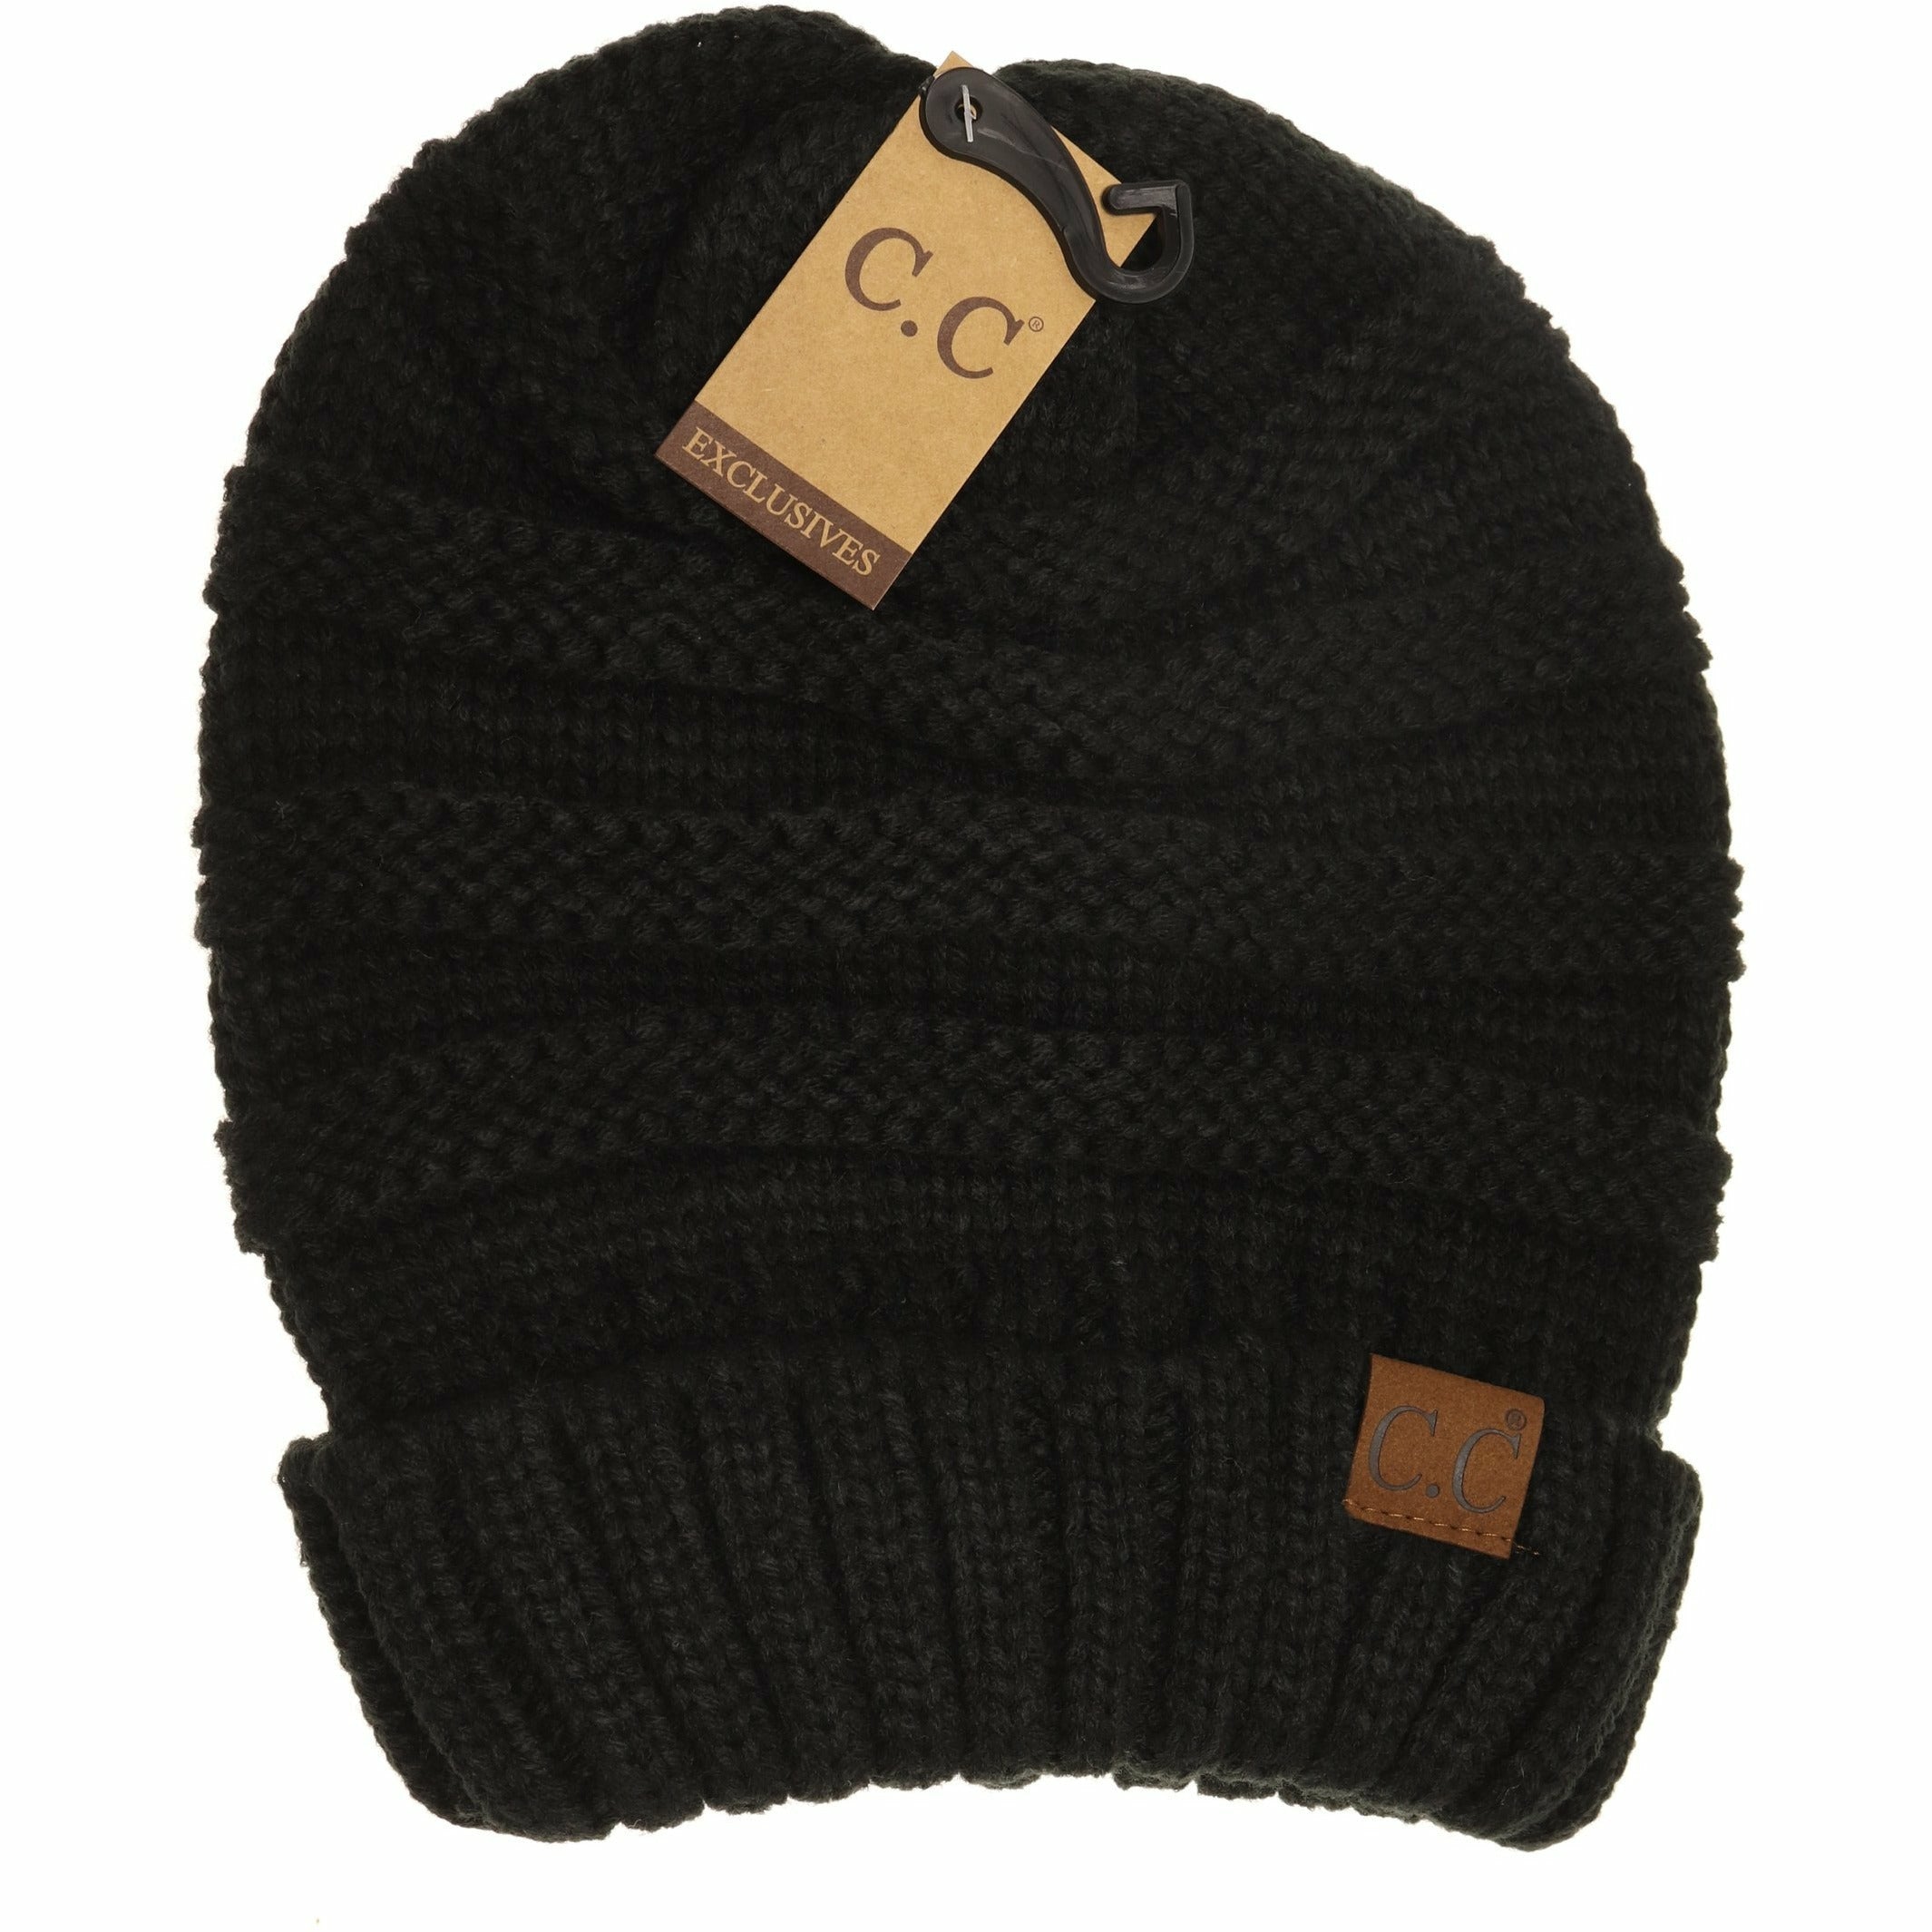 C. Exclusives Slouchy Beanie HAT-100